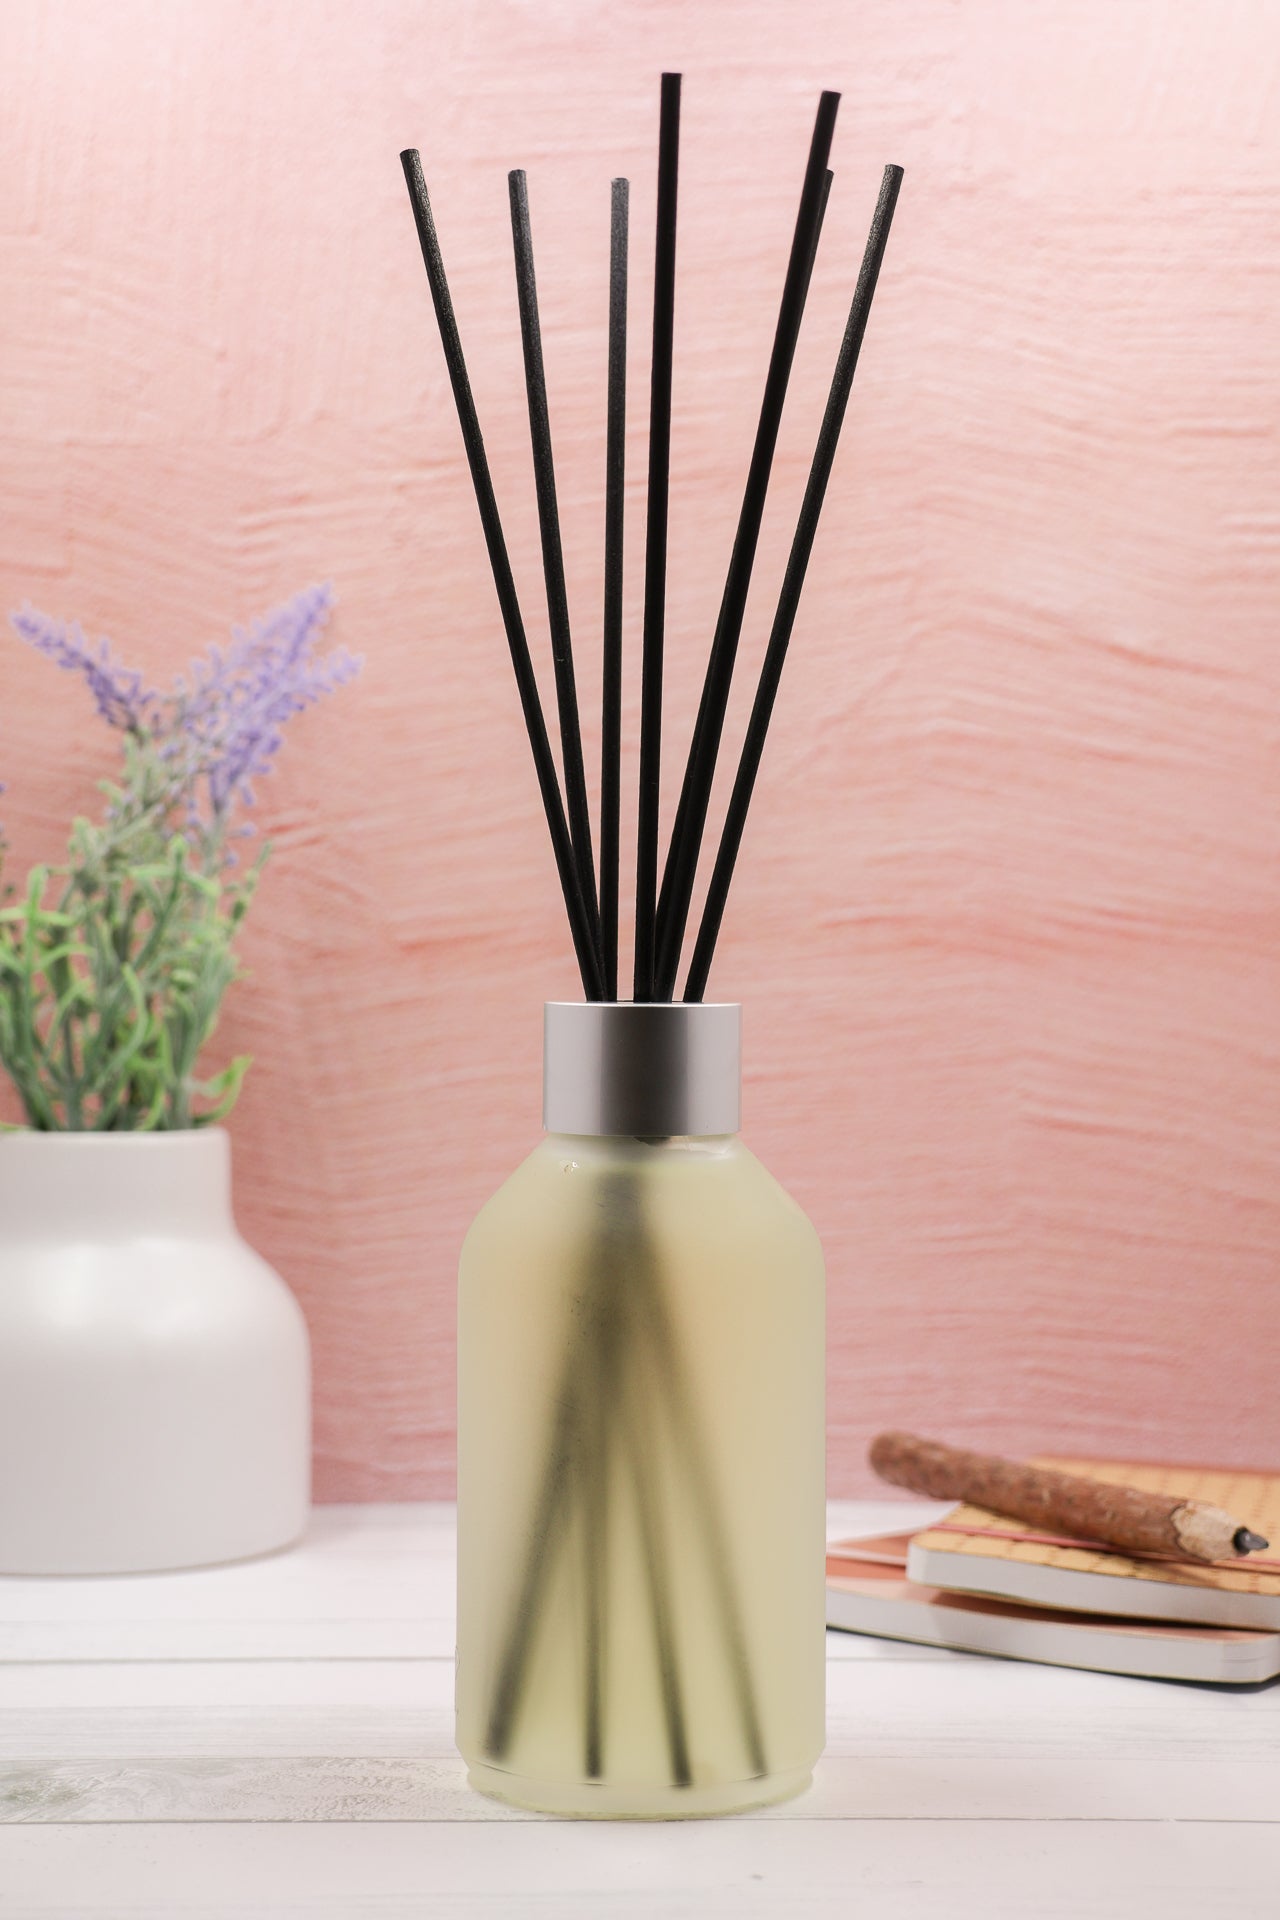 Crystal infused diffuser with wicks with the fragrance Oudh Wood, Leather and Amber